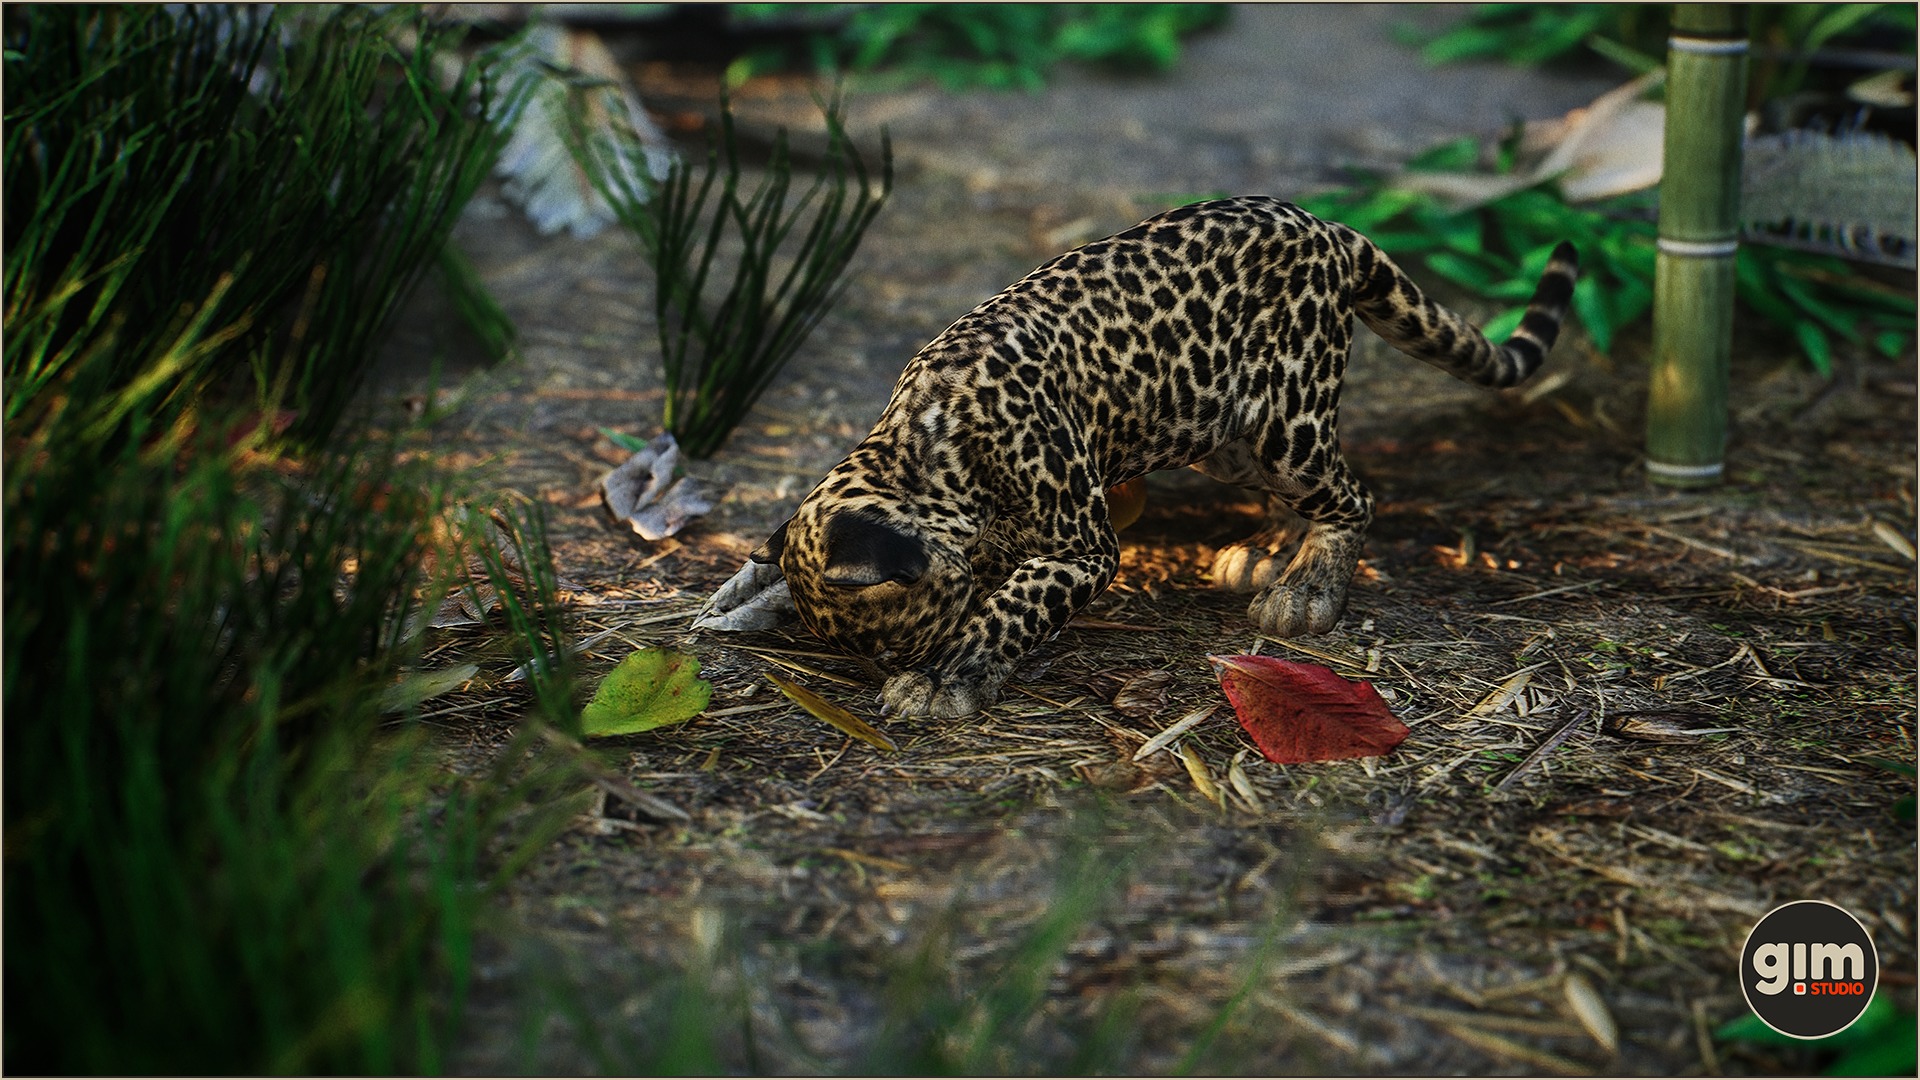 Young leopard trying to eat an ant.